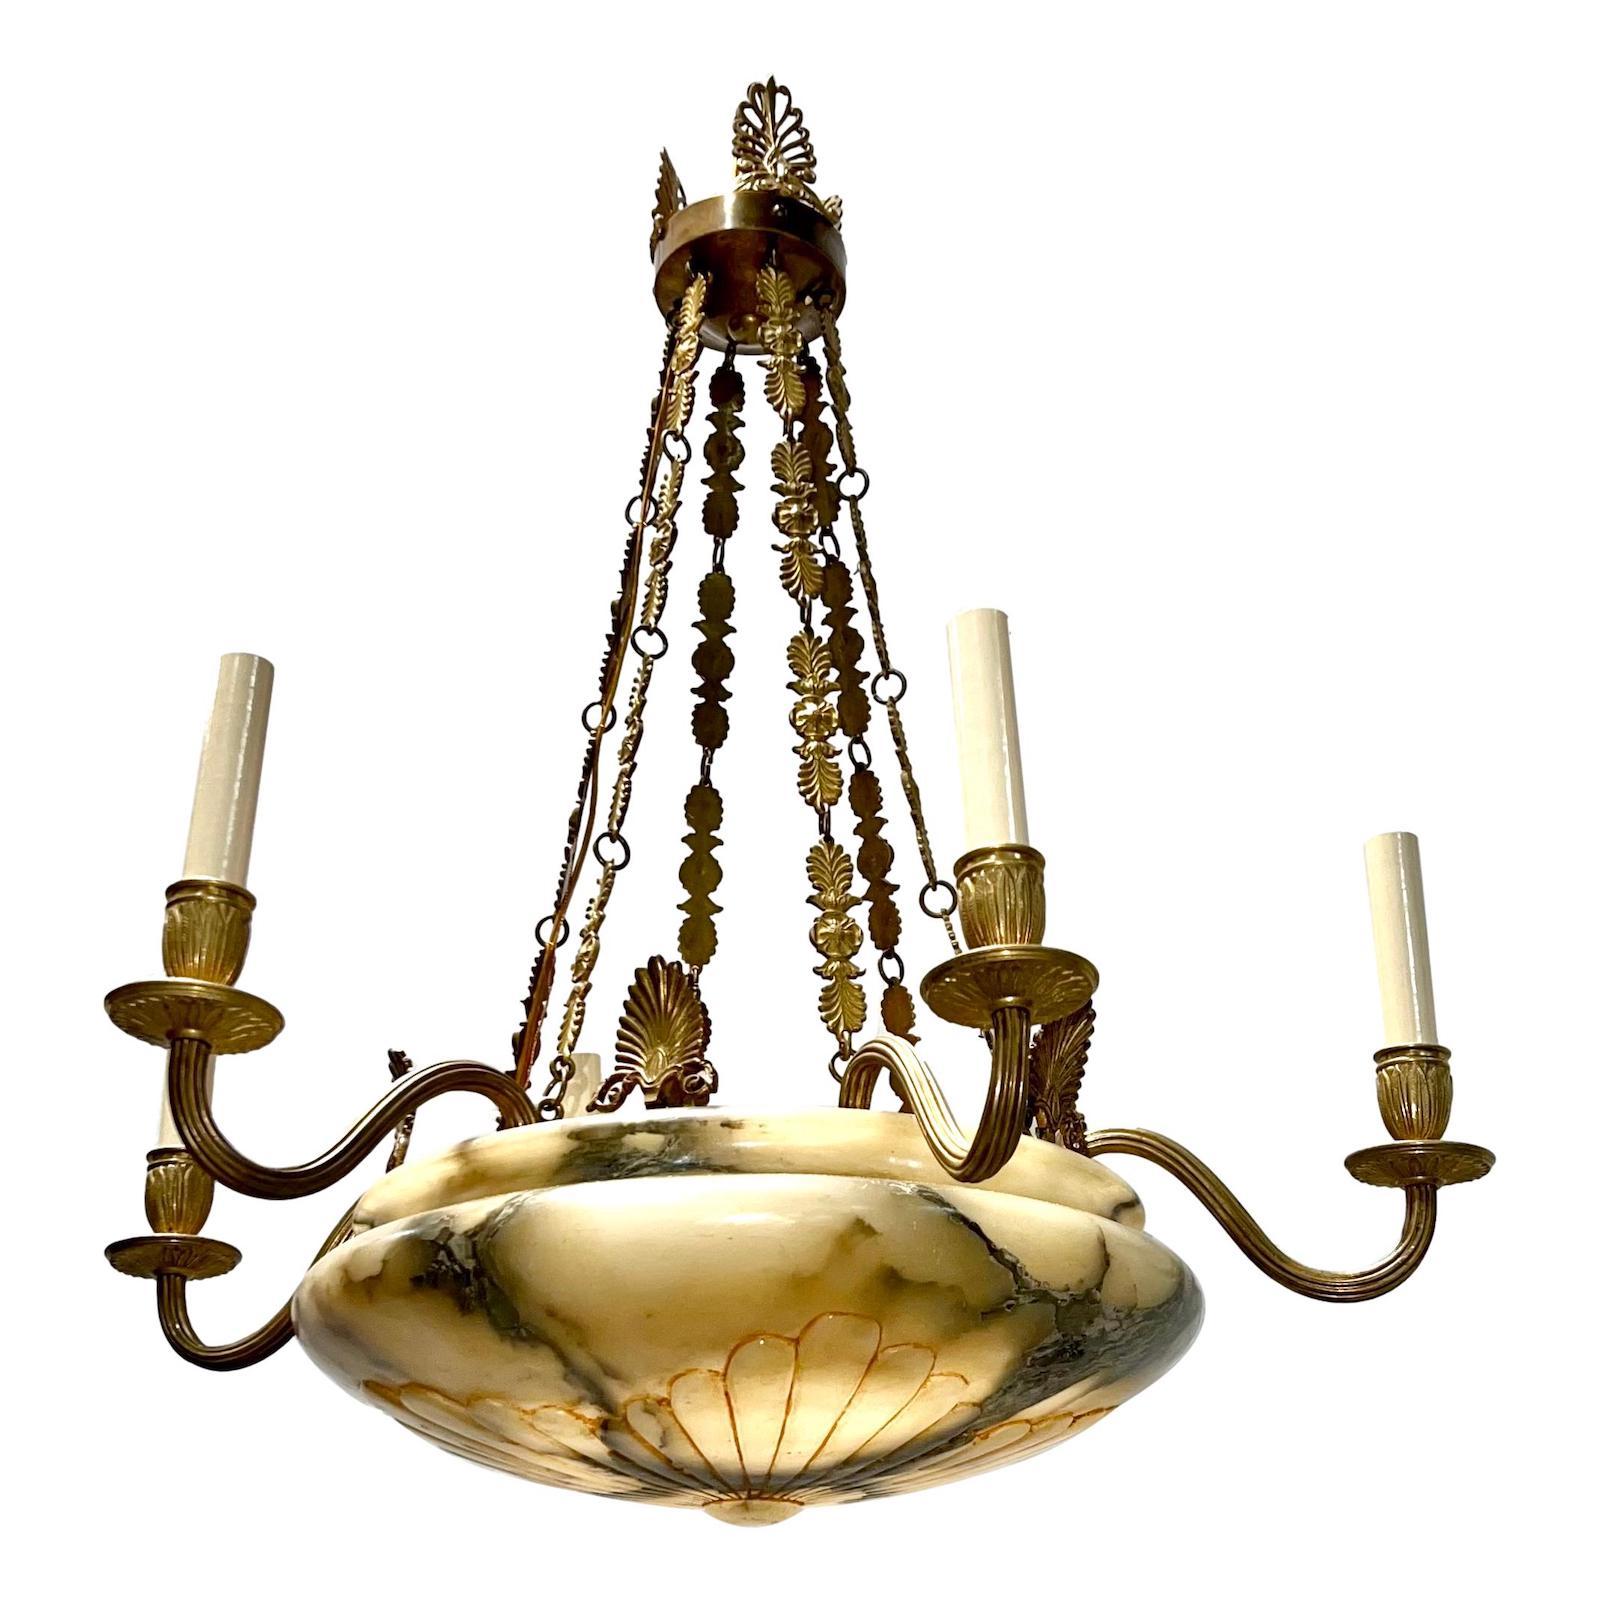 A circa 1920's French gilt bronze and alabaster eight-arm chandelier.

Measurements:
Current drop: 39